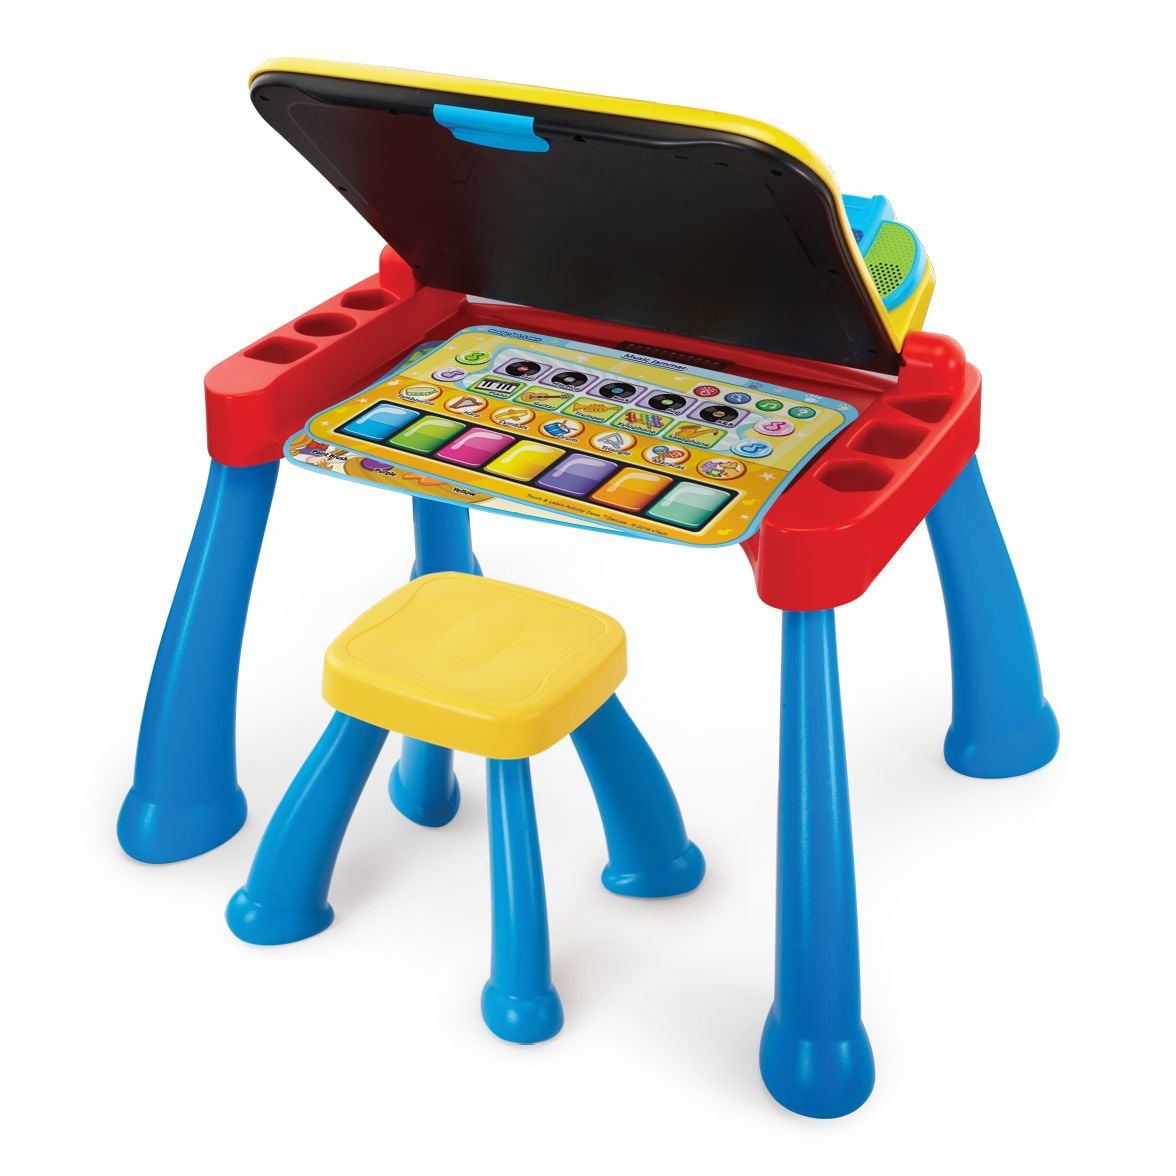 VTech Touch and Learn Activity Desk Deluxe Kids Educational Game Chair Table Set 